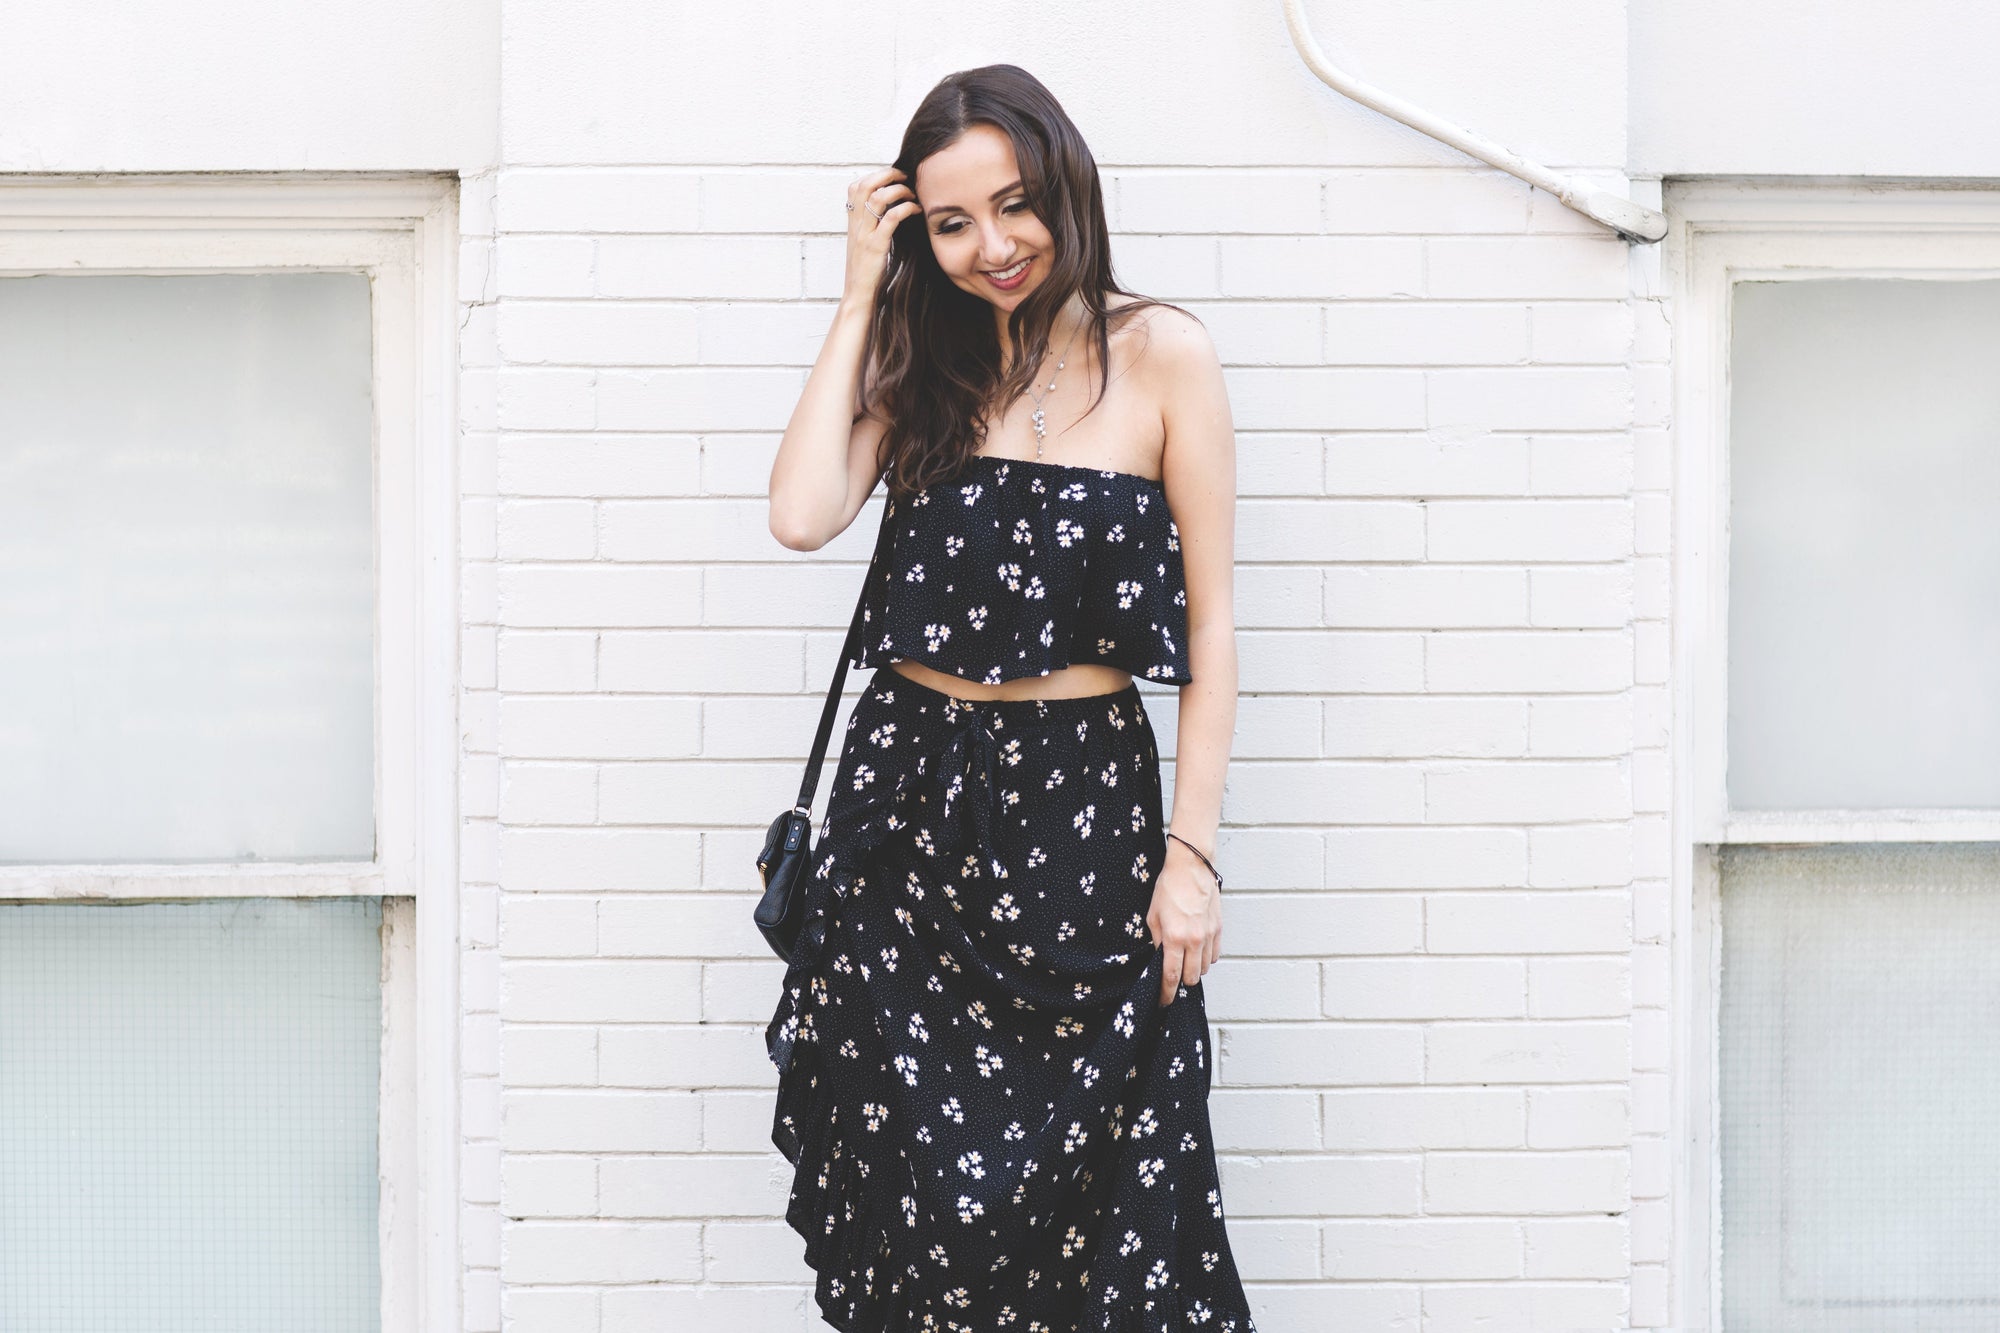 Fashion blogger posing in front of brick wall in floral summer dress with black handbag